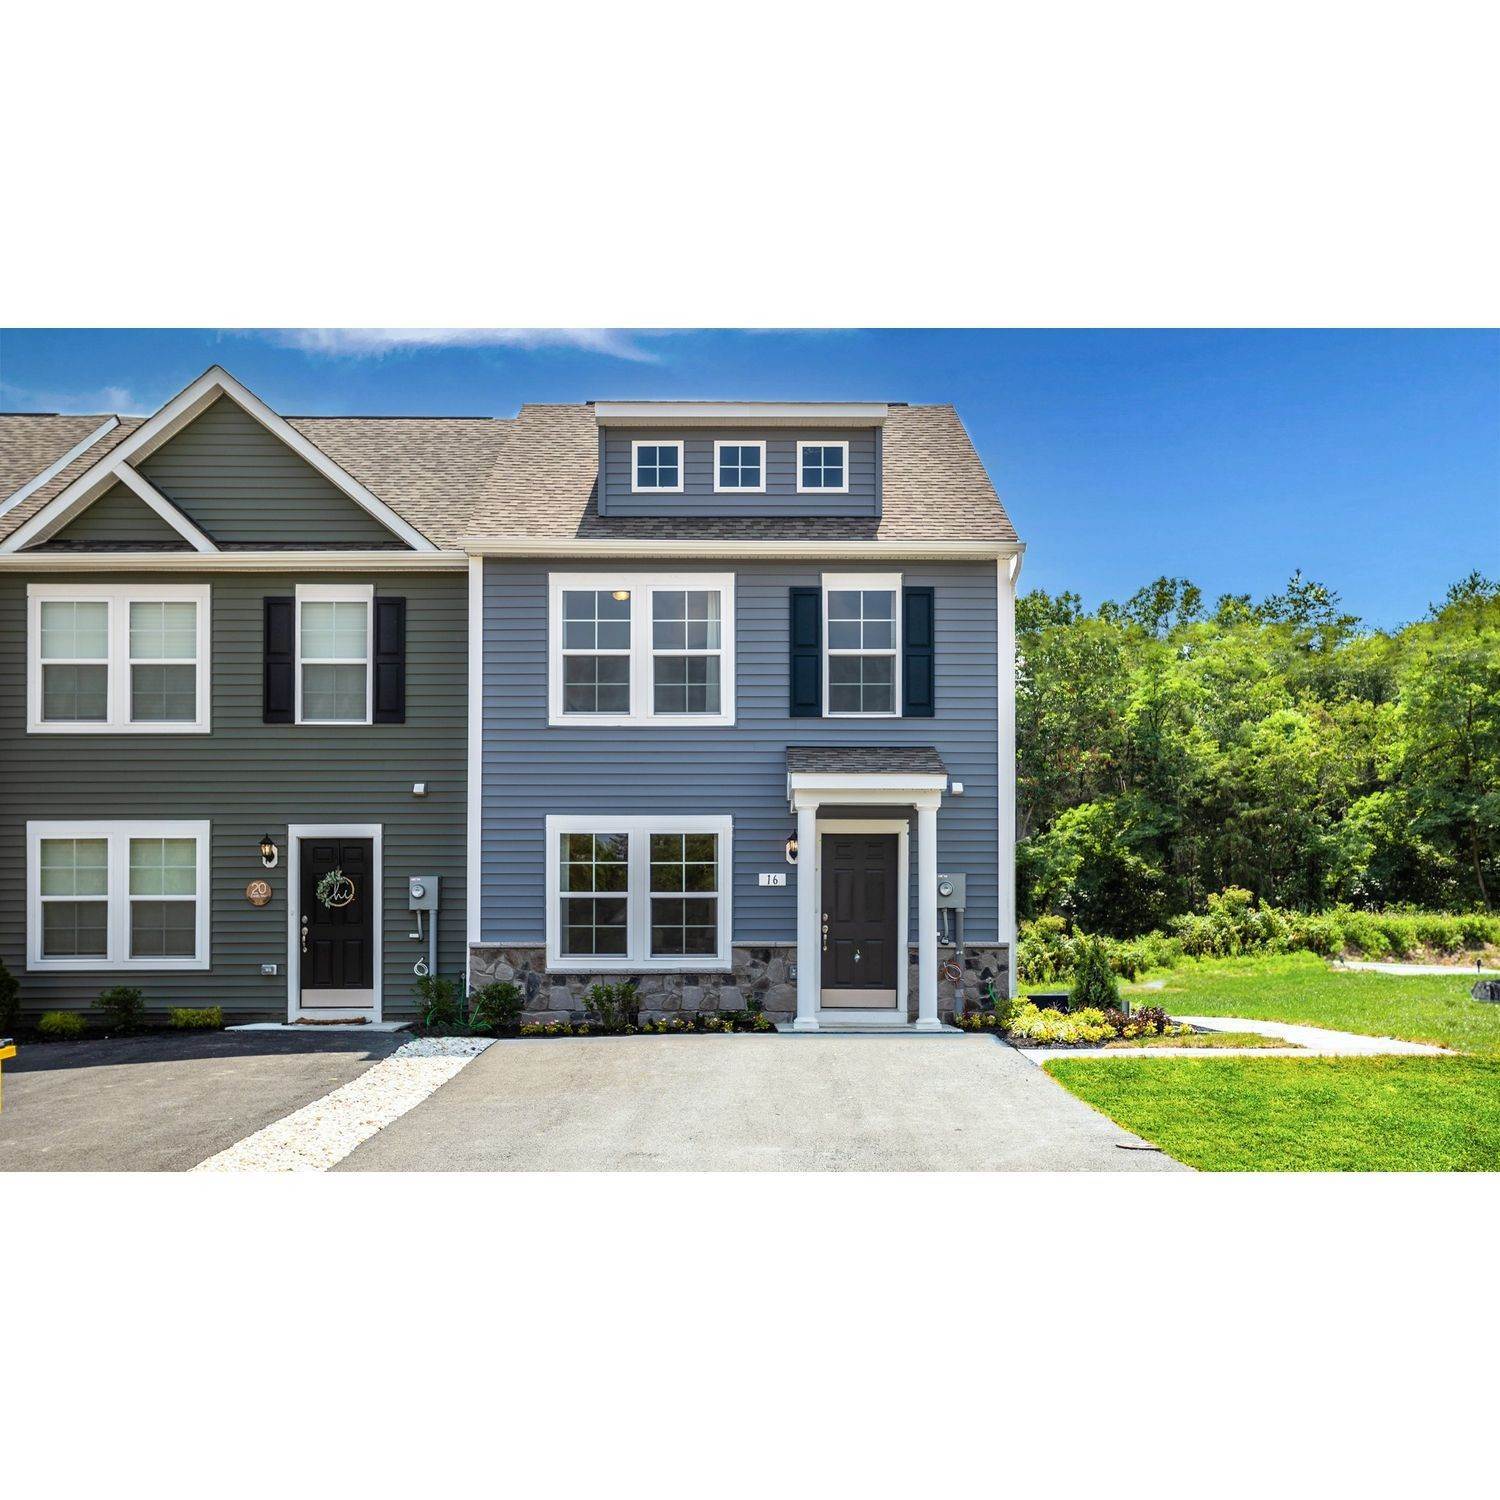 2. Whispering Pines Townhomes byggnad vid 16 Loblolly Drive, Bunker Hill, WV 25413